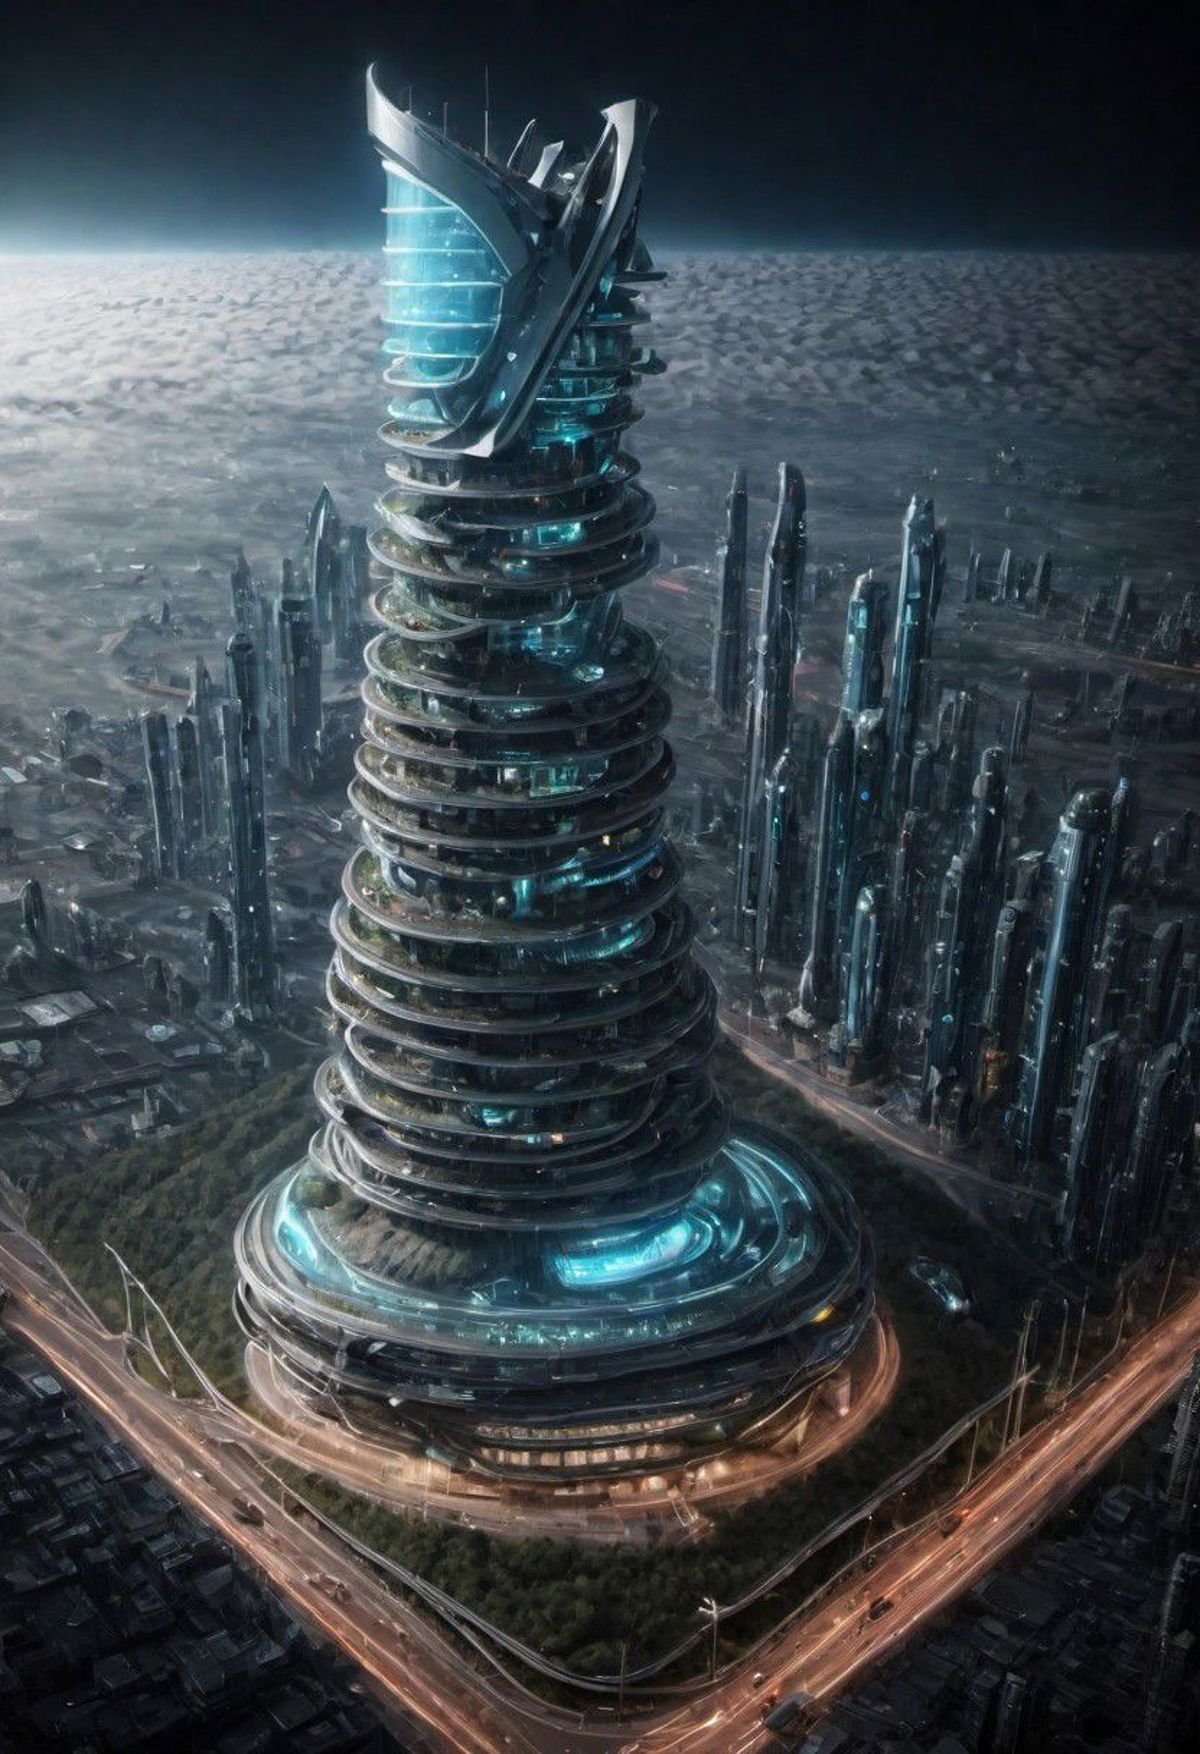 Futuristic Cityscape with Tall, Artistic Skyscraper and Other Buildings